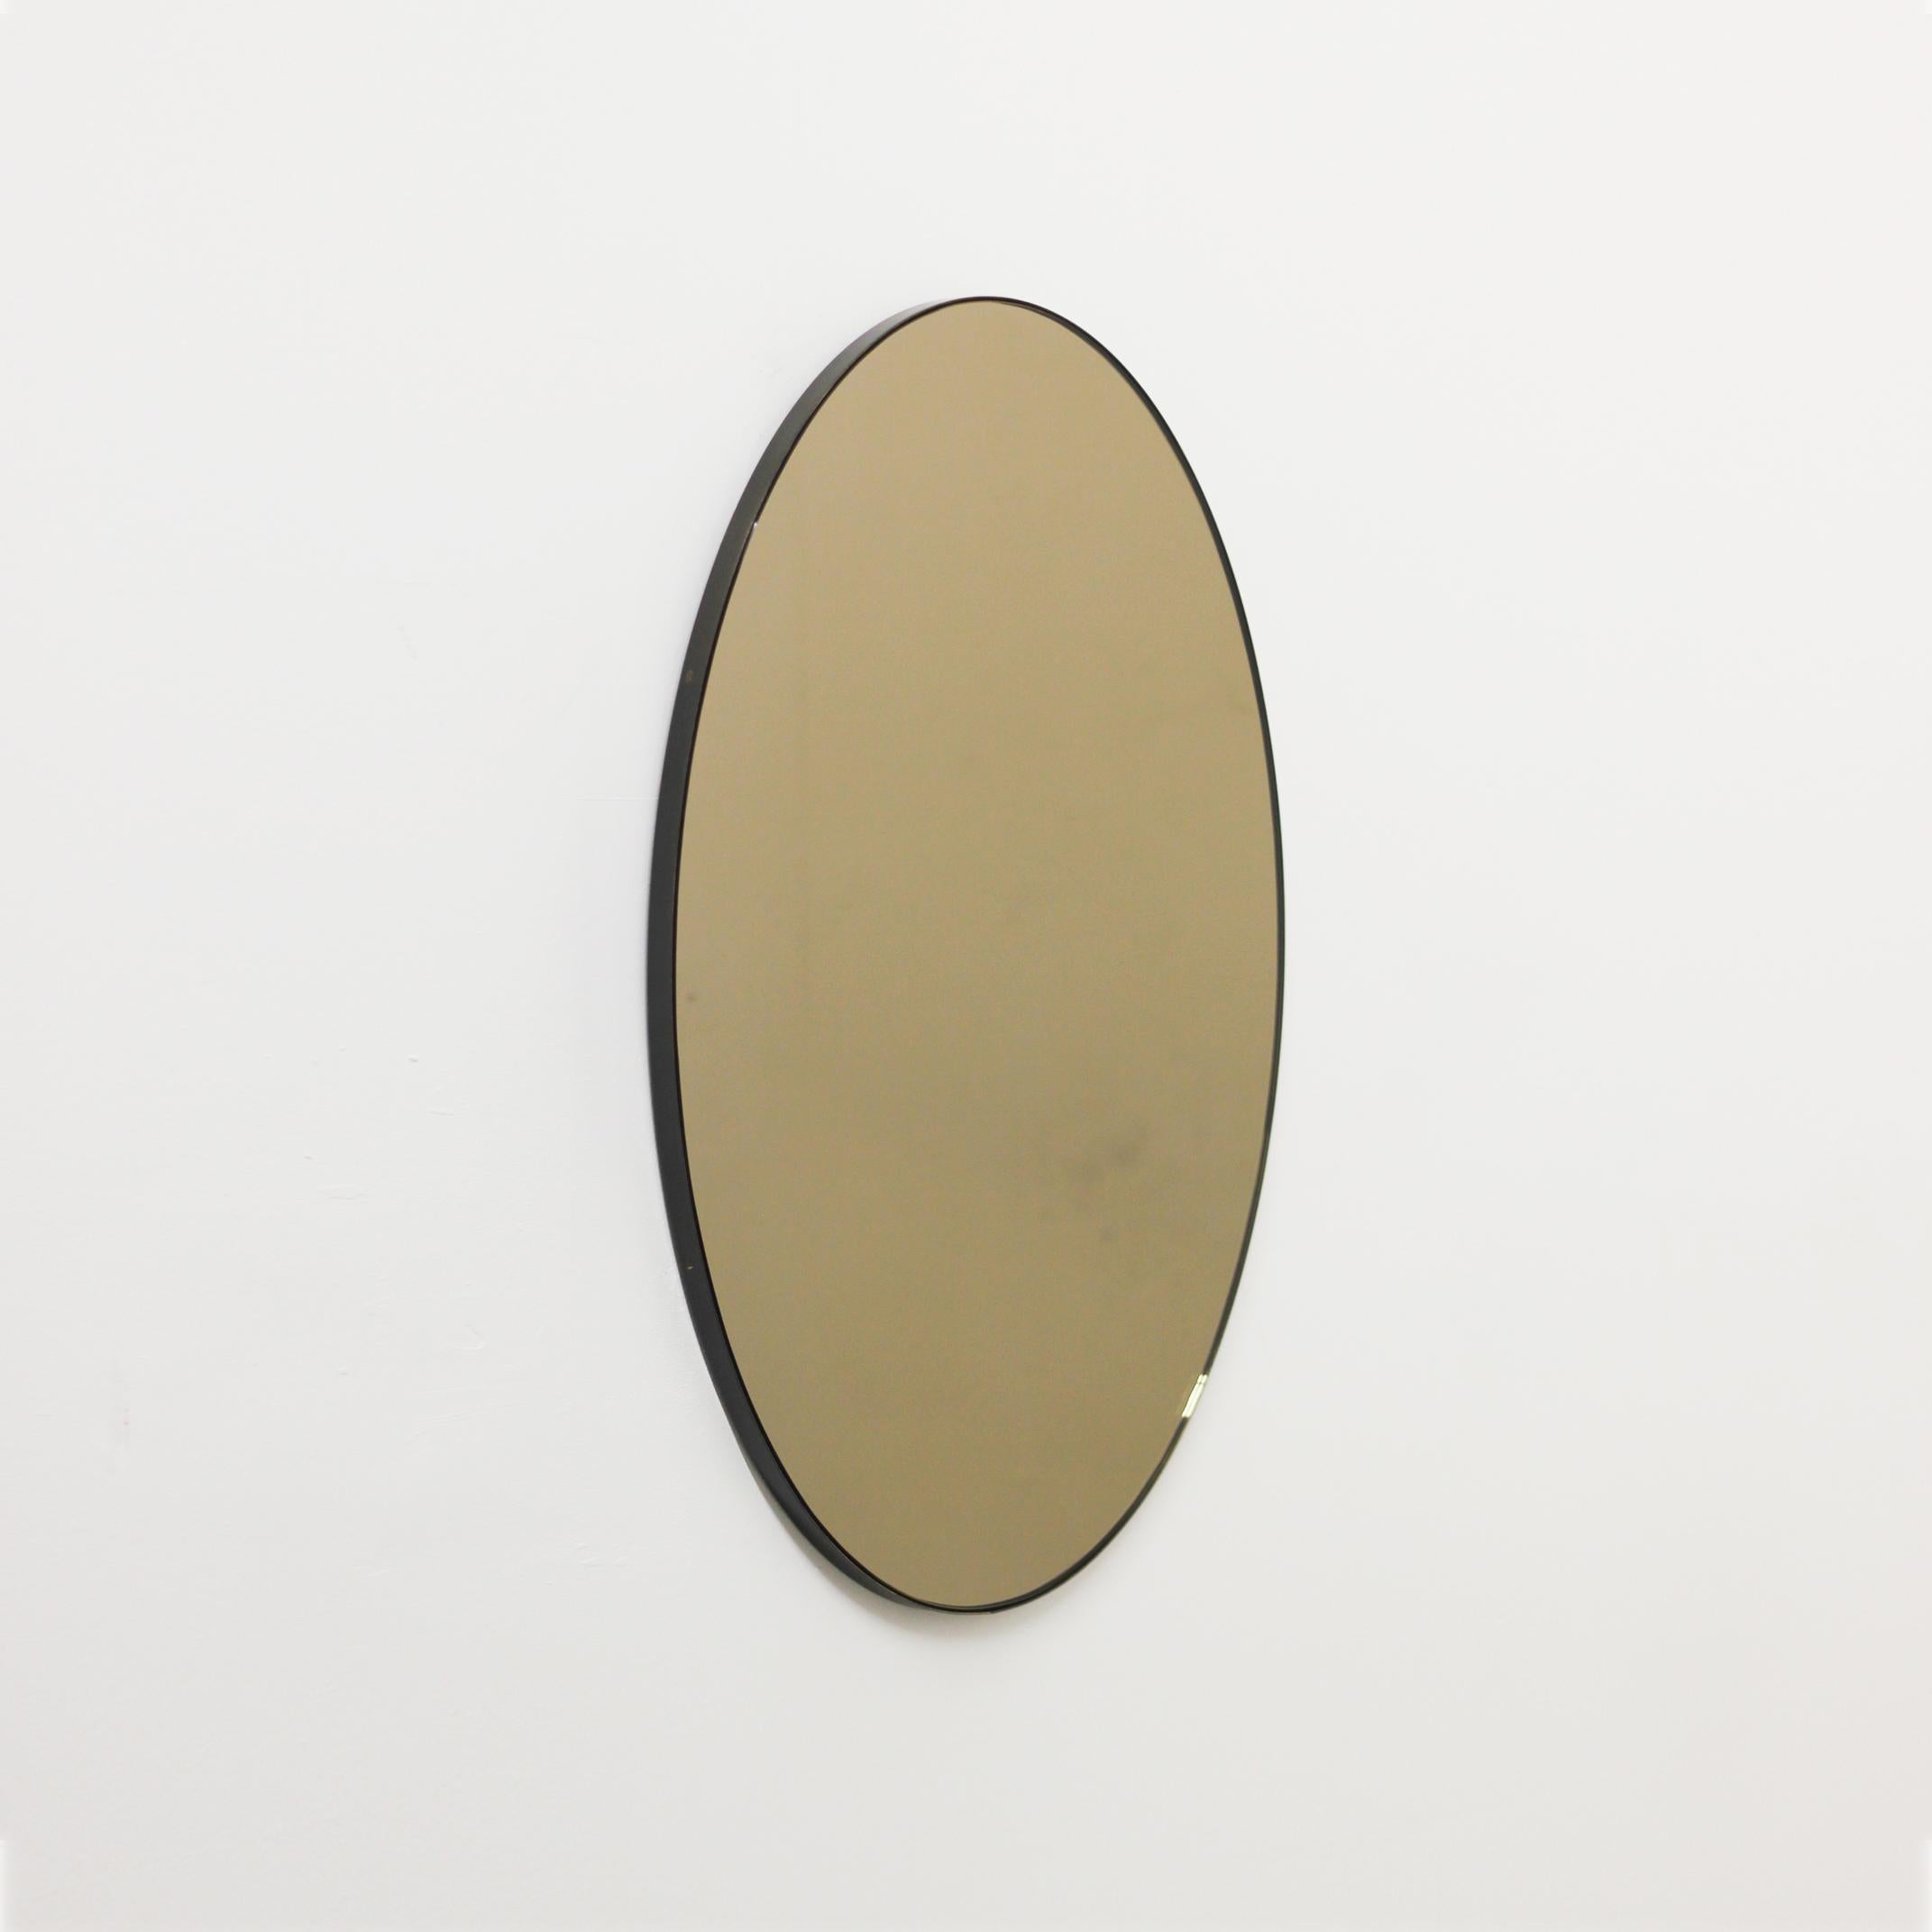 Contemporary oval bronze tinted mirror with an elegant bronze patina brass frame. Designed and handcrafted in London, UK.

This mirror is fully customisable. Shipped safely and fully insured worldwide.

Our mirrors are designed with an integrated